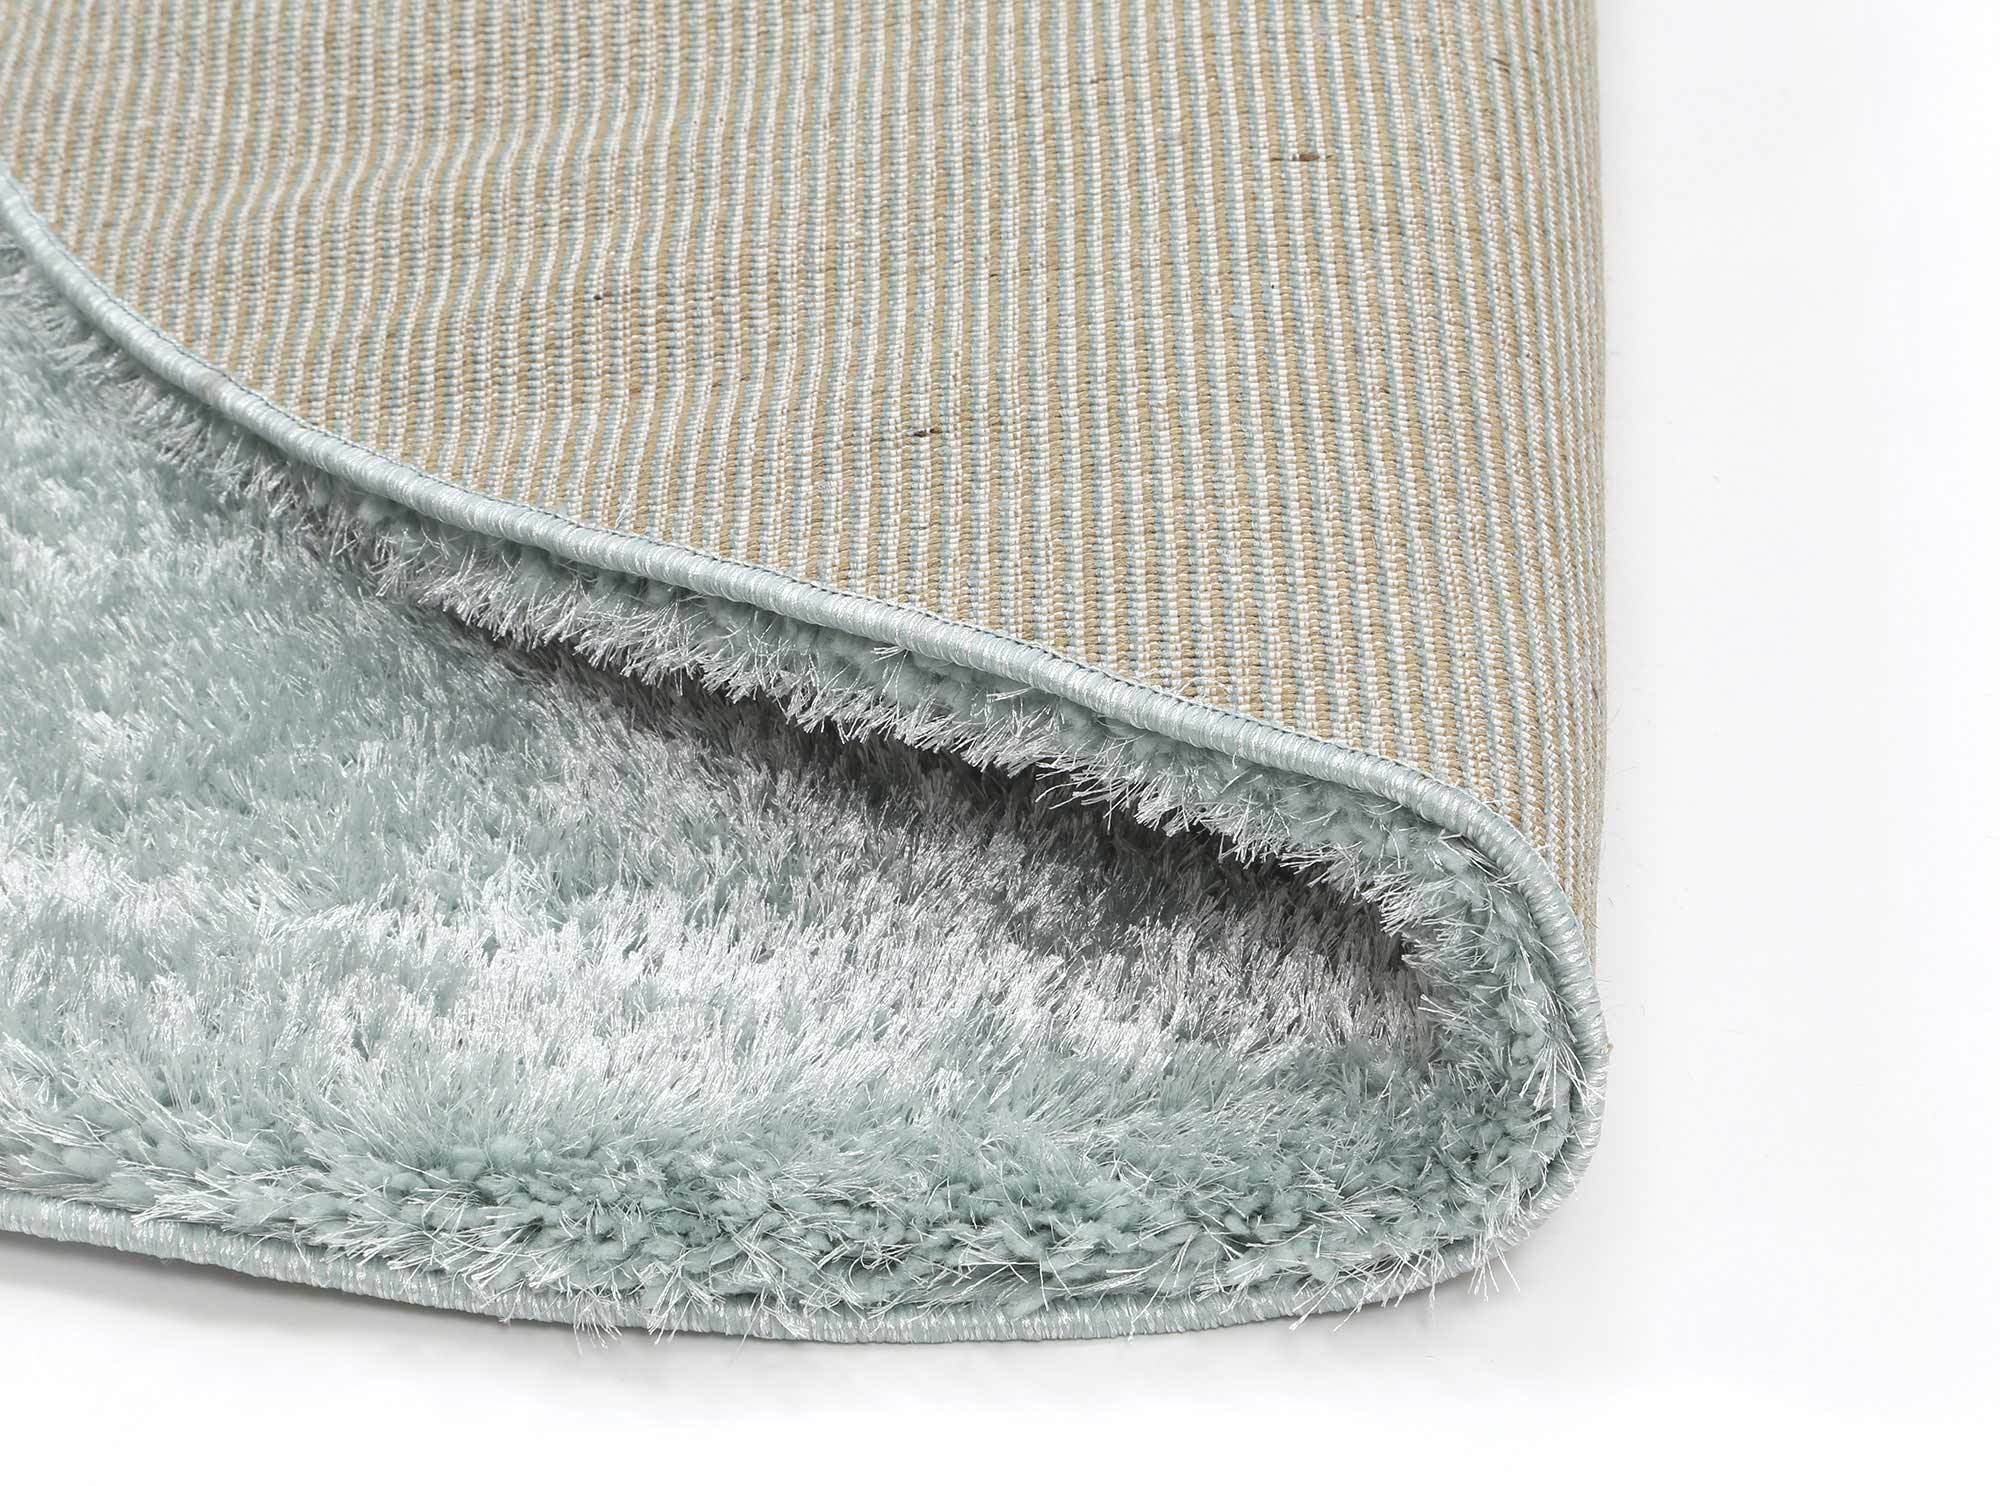 Brendon Teal Shaggy Round Rug